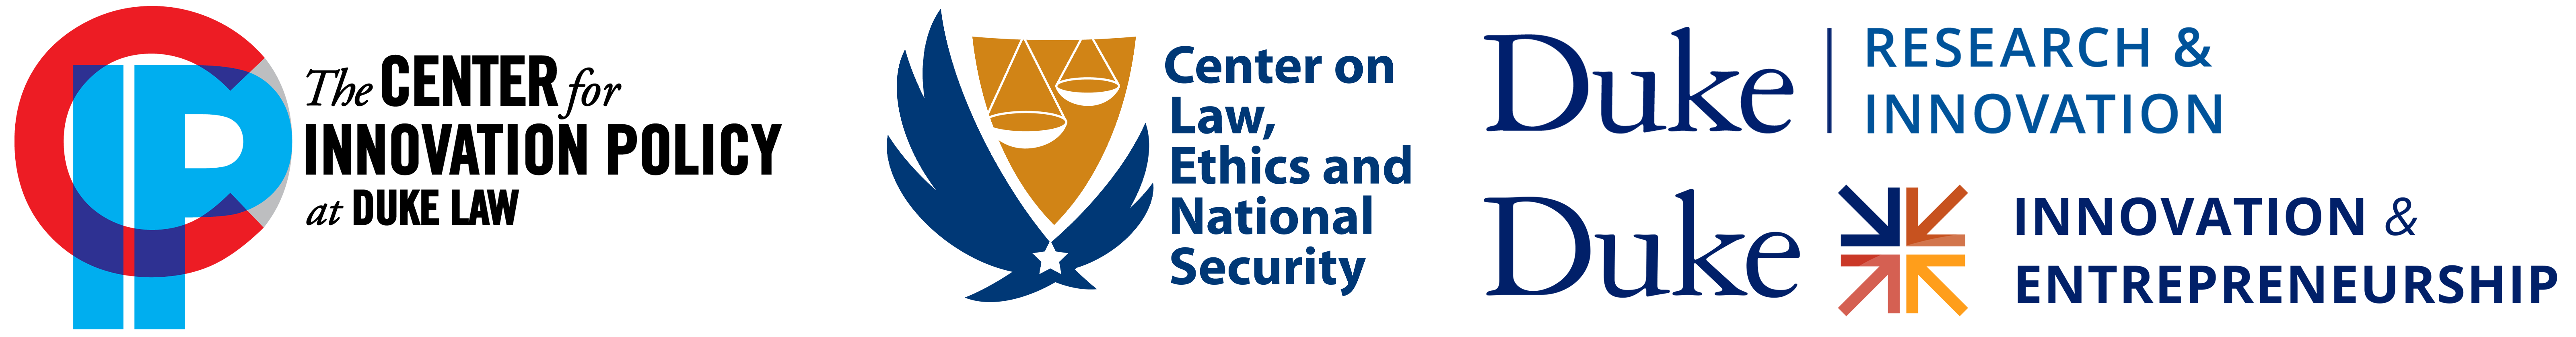 Co-sponsors: The Center for Innovation Policy at Duke Law; Duke Law Center for Law, Ethics and National Security; Duke University Office of Research &amp; Innovation; Duke University Innovation &amp; Entrepreneurship Initiative